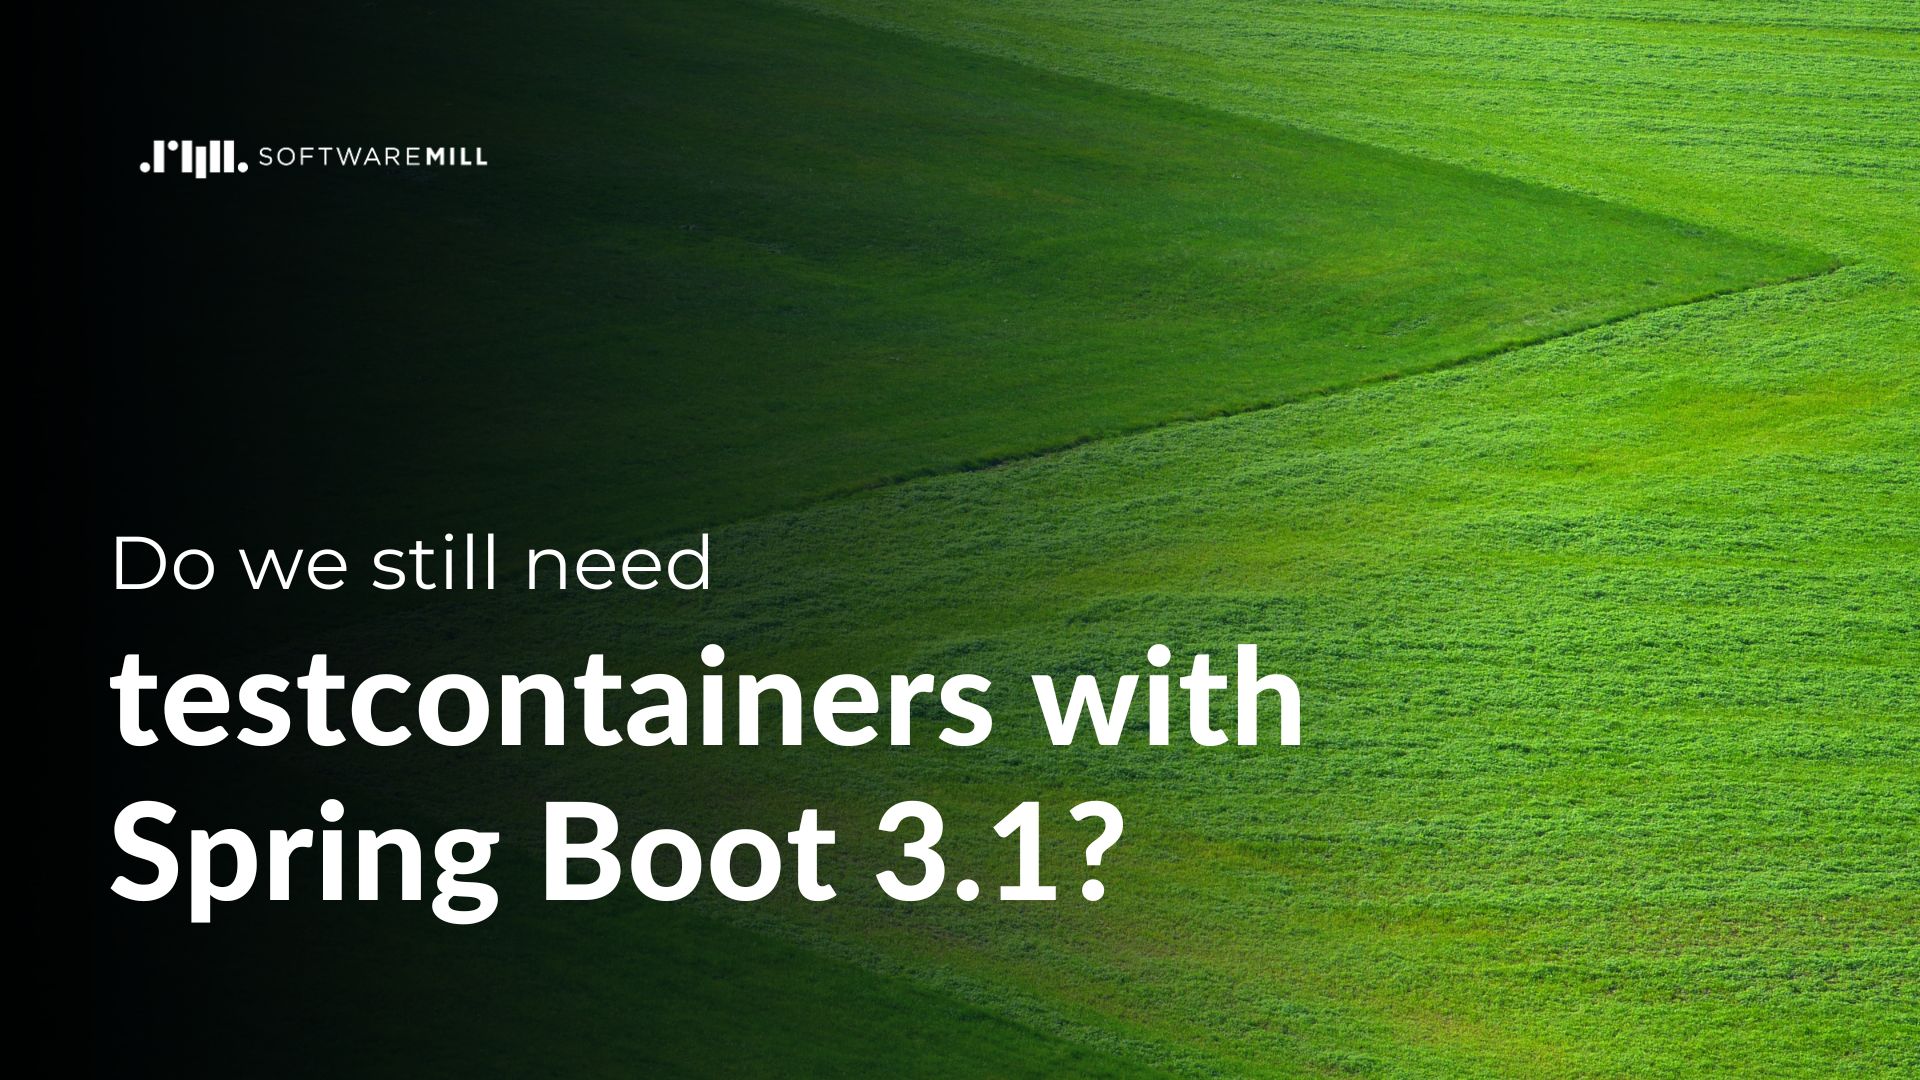 Do you still need testcontainers with Spring Boot 3.1? webp image